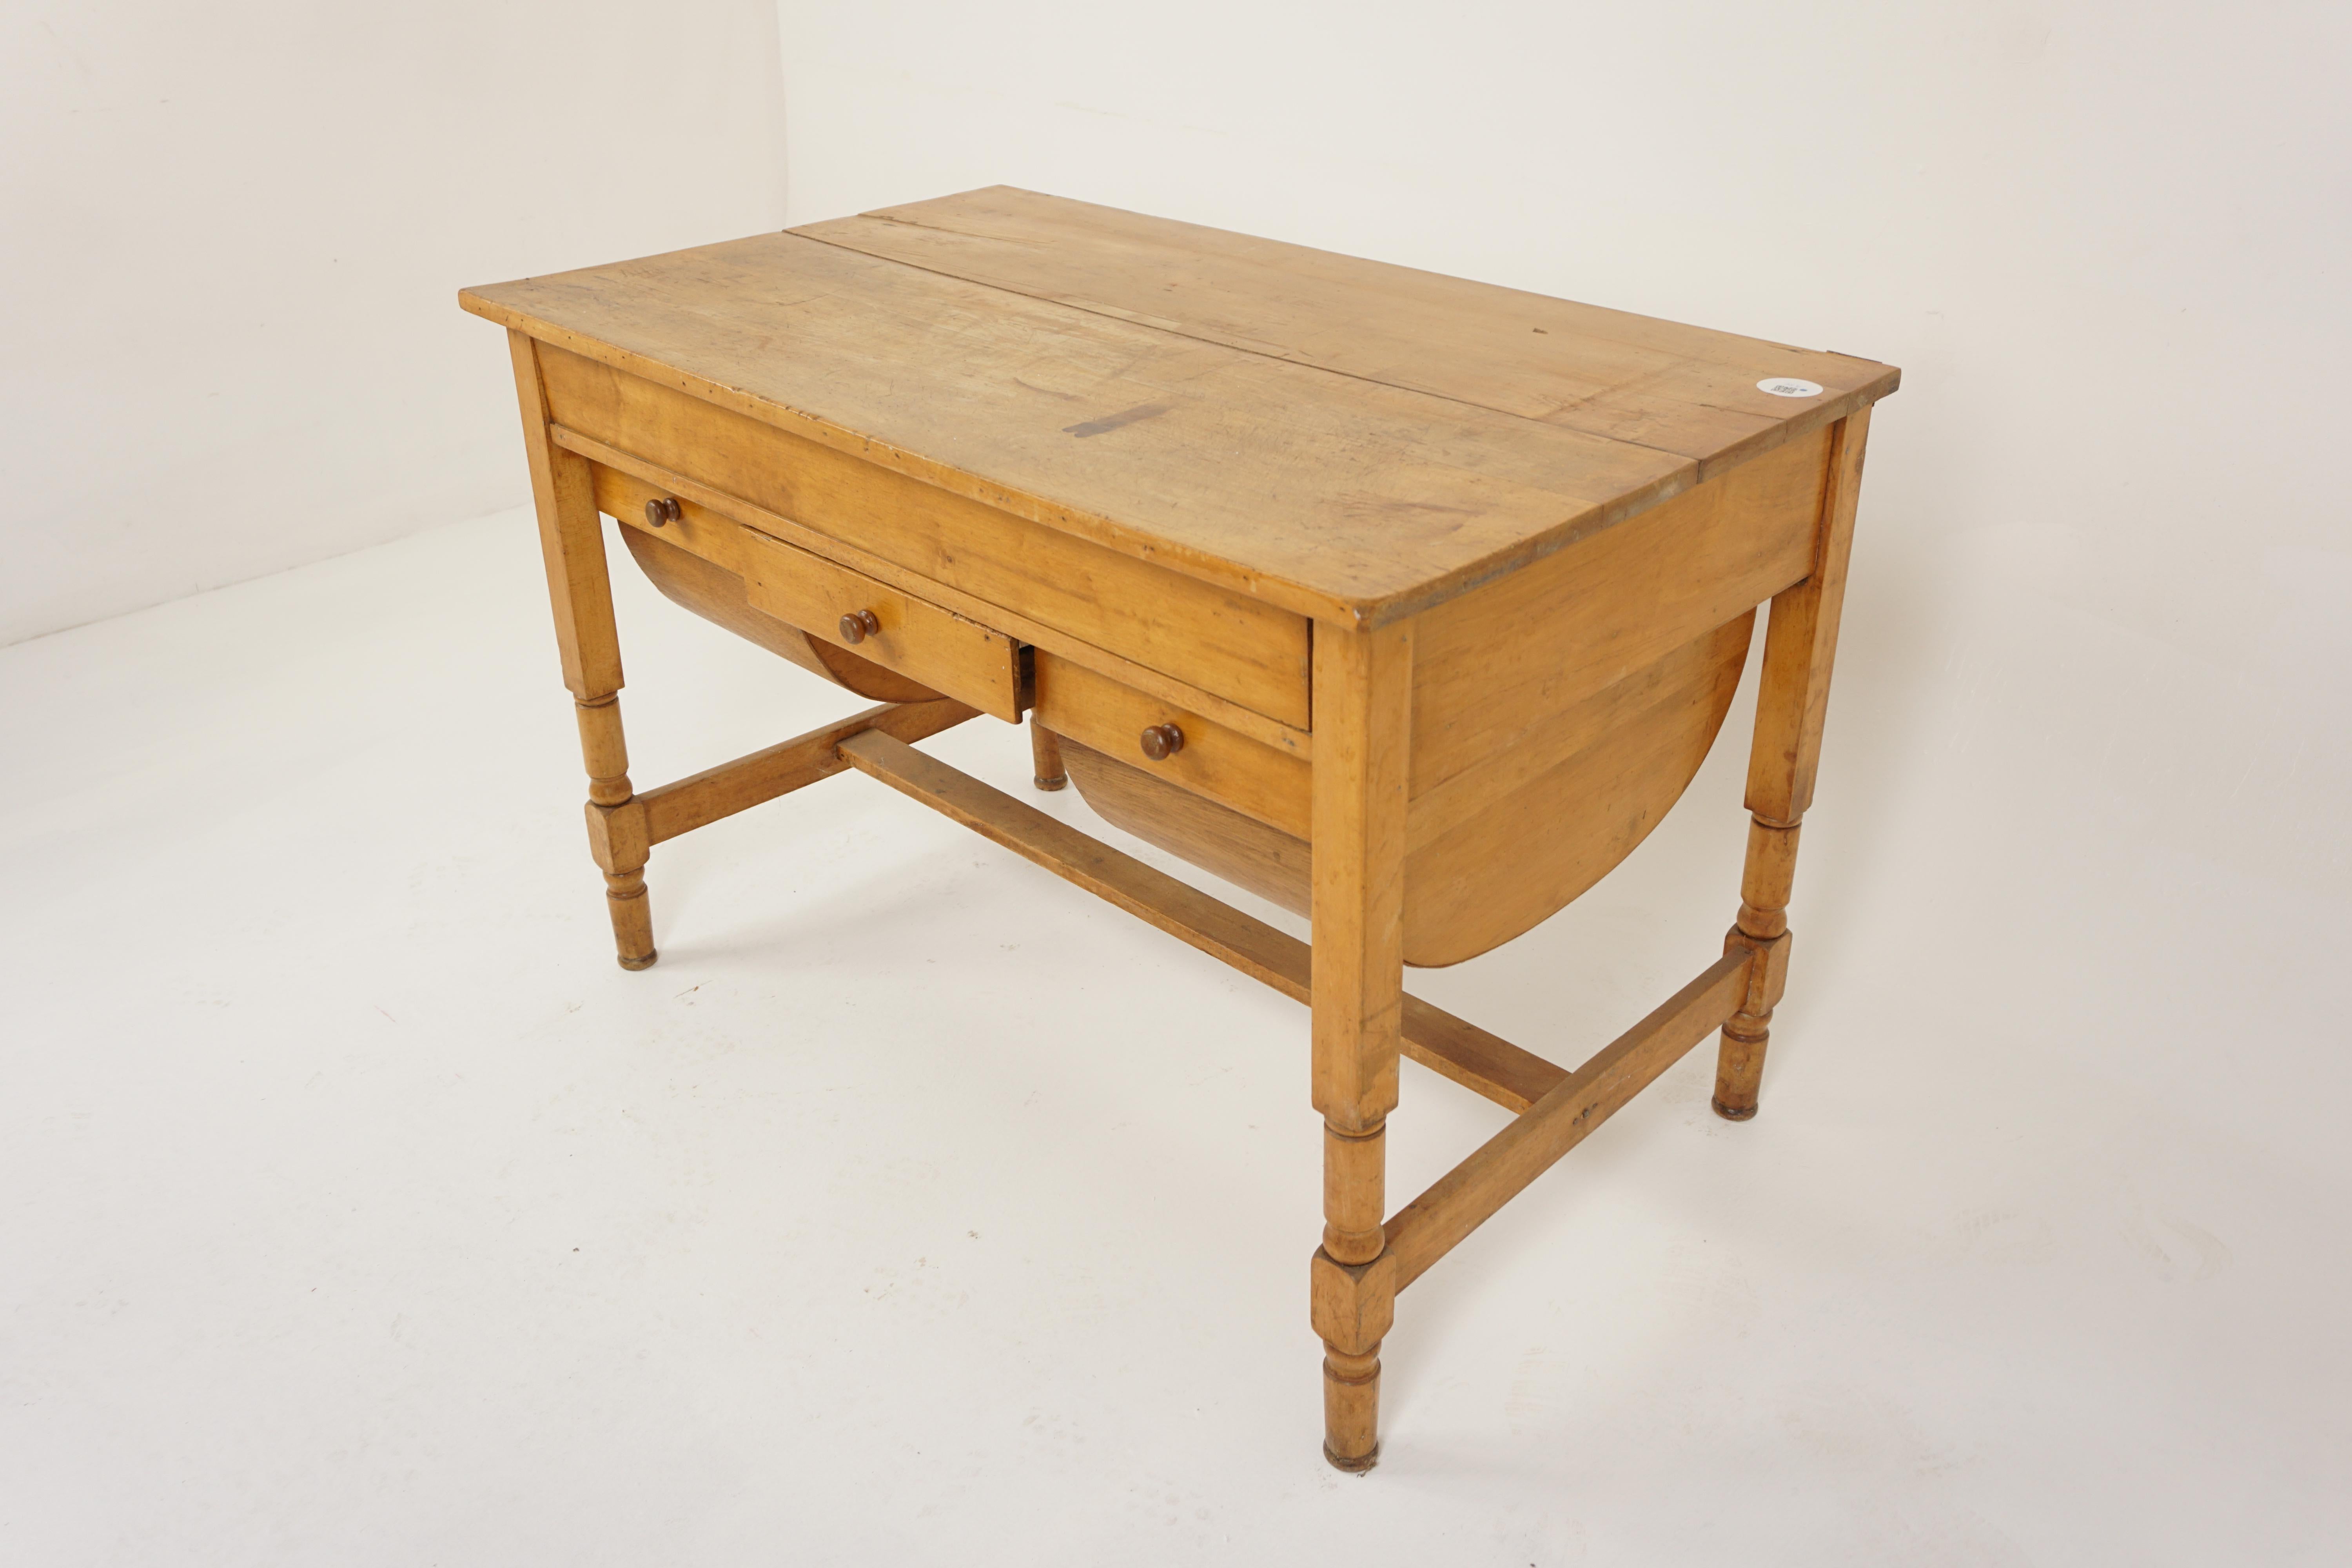 Ant. Victorian Pine Kitchen Lift Table Baking Table, Scotland 1890, H938

Scotland 1890
Solid Pine
Original Finish 
Rectangular top lifts up and is supported on one end by a wedge
Cutlery drawer in the center
Flower bin on the right and left